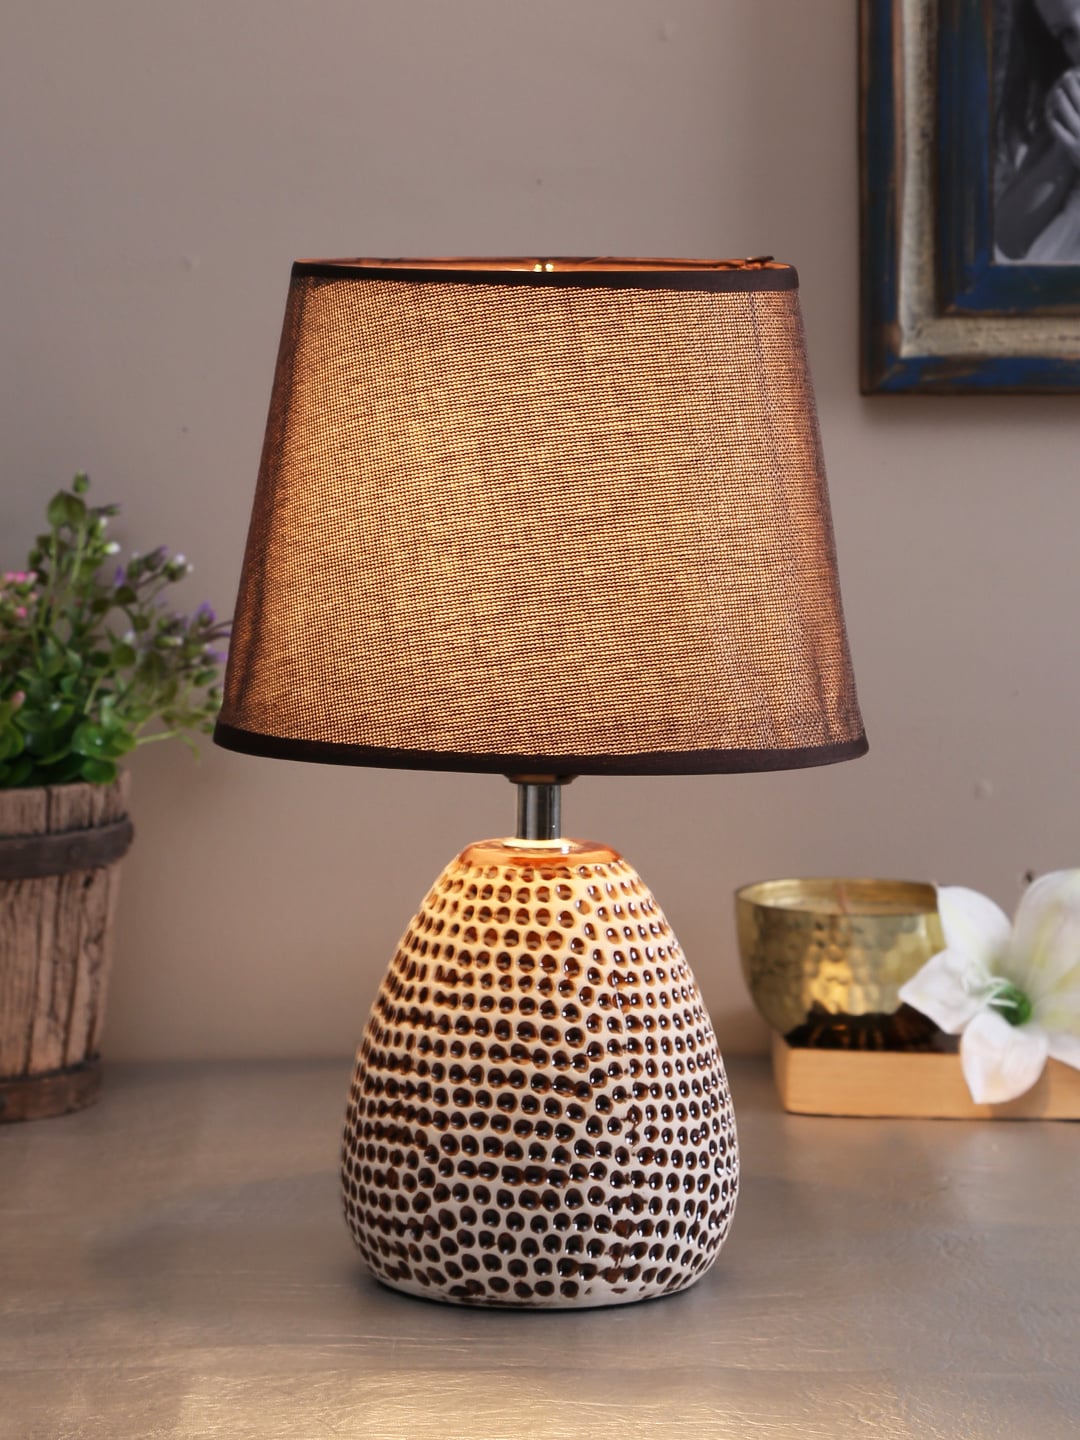 TAYHAA Brown Textured Frustum-Shaped Pierced Ceramic Table Lamp & Shade Price in India